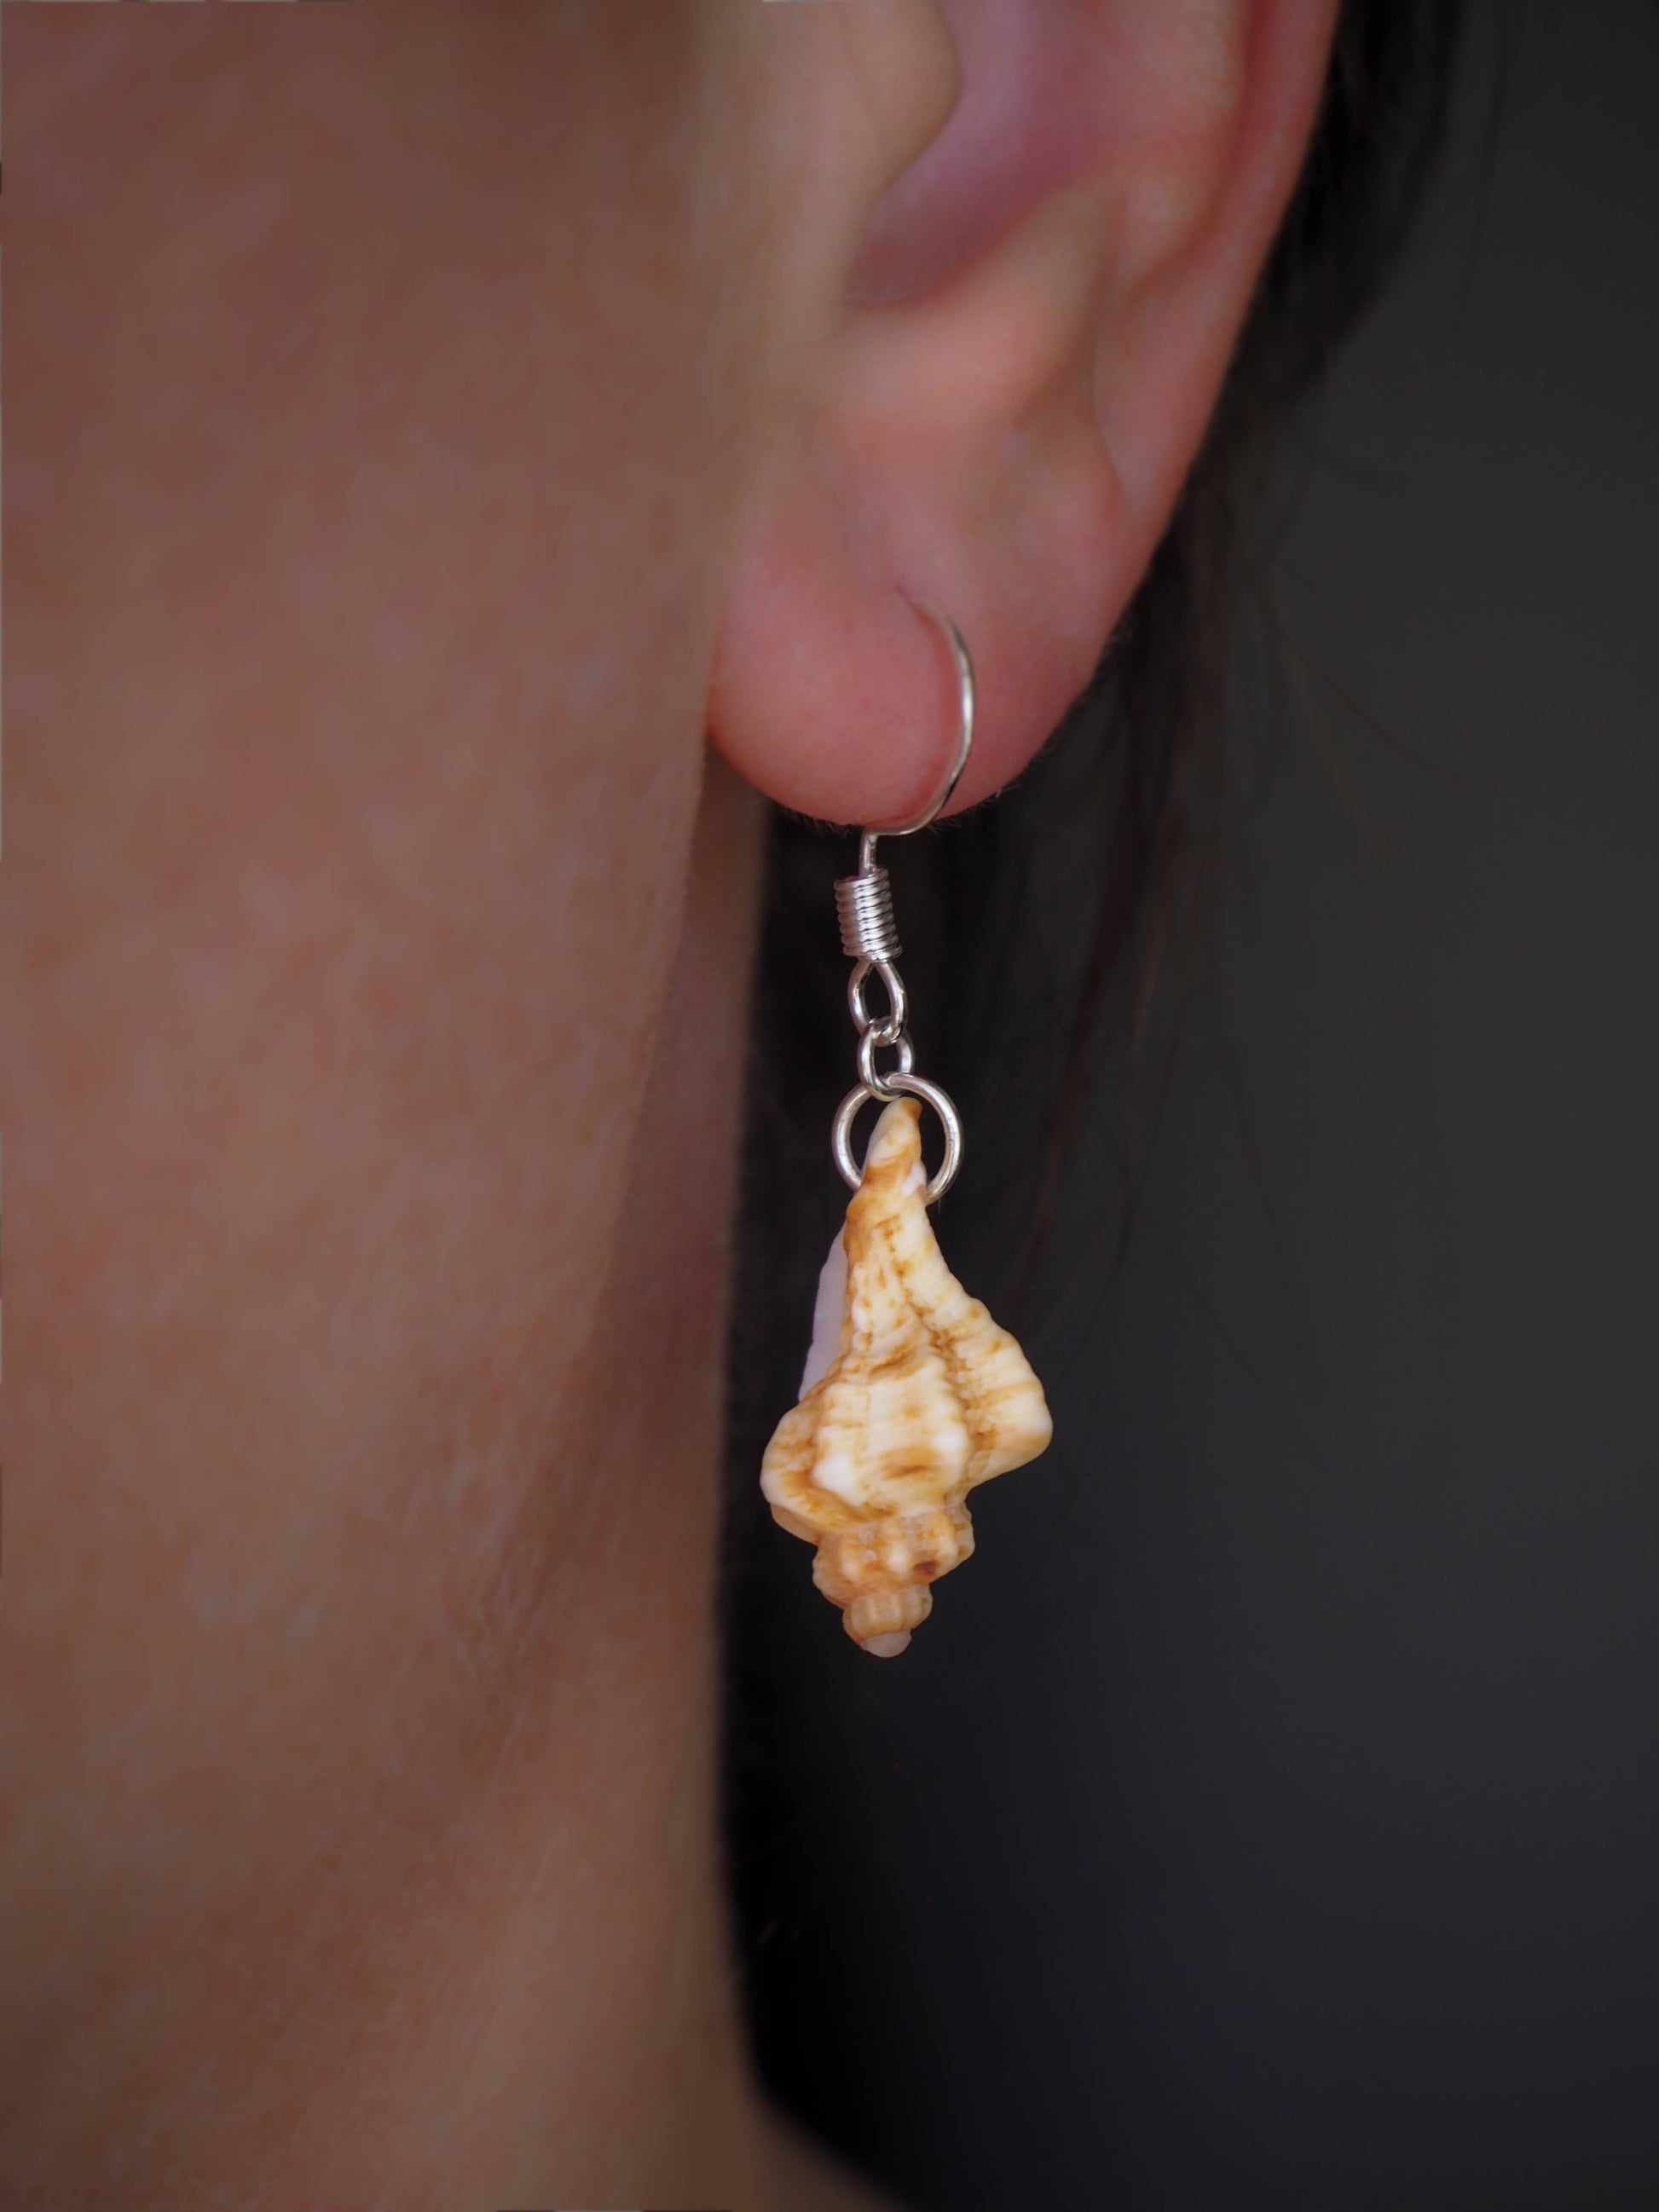 Handmade 925 Silver Earrings adorned with Sting Winkle Shells, Seaside Collection